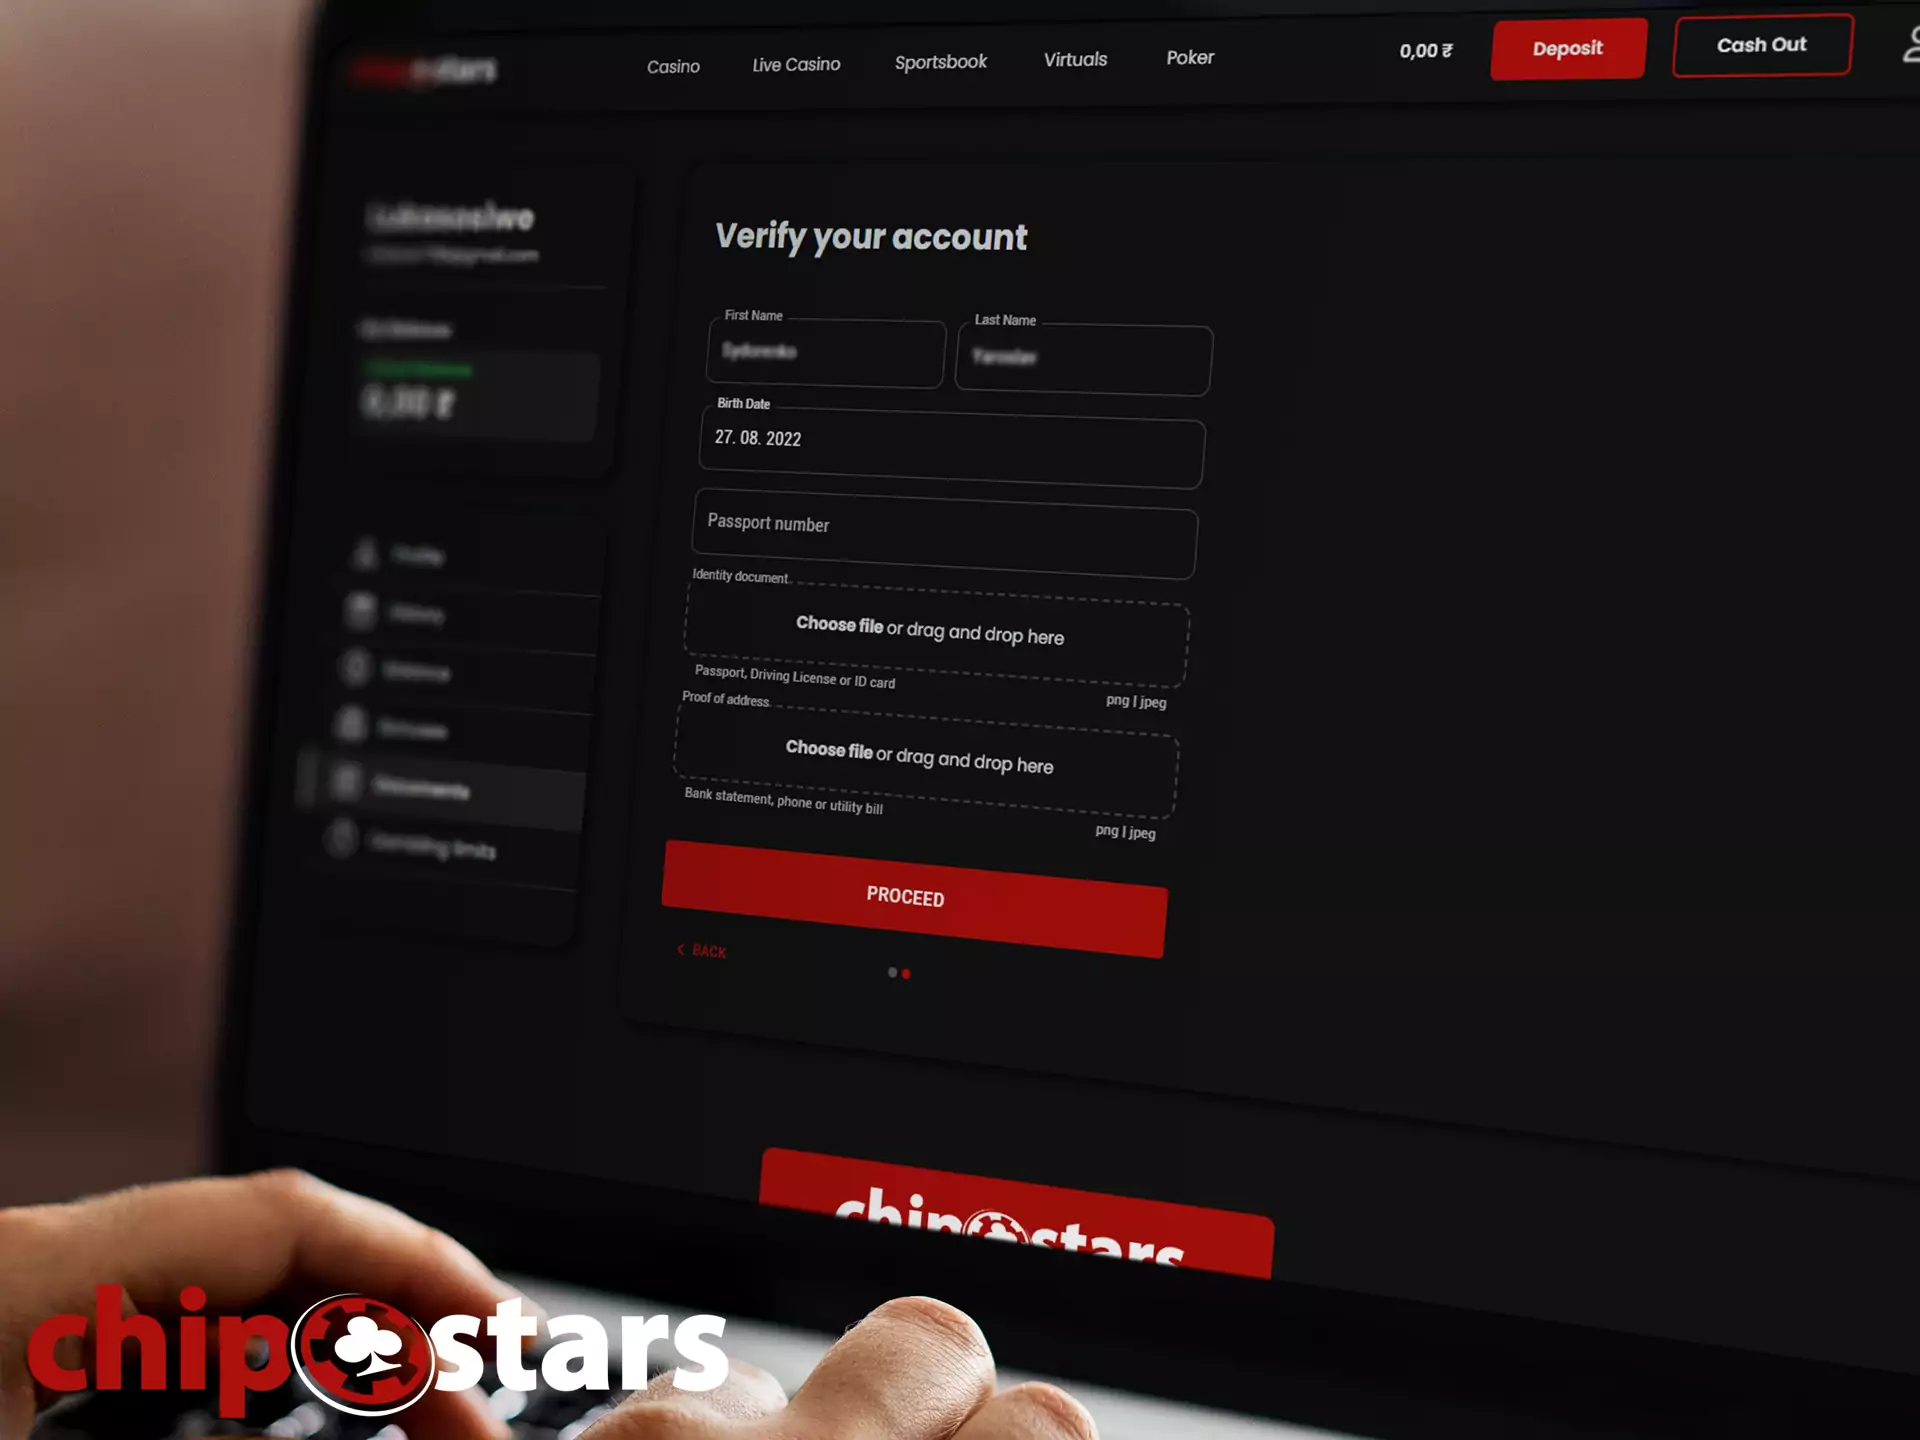 Only verified users can enjoy all the features available on Chipstars.